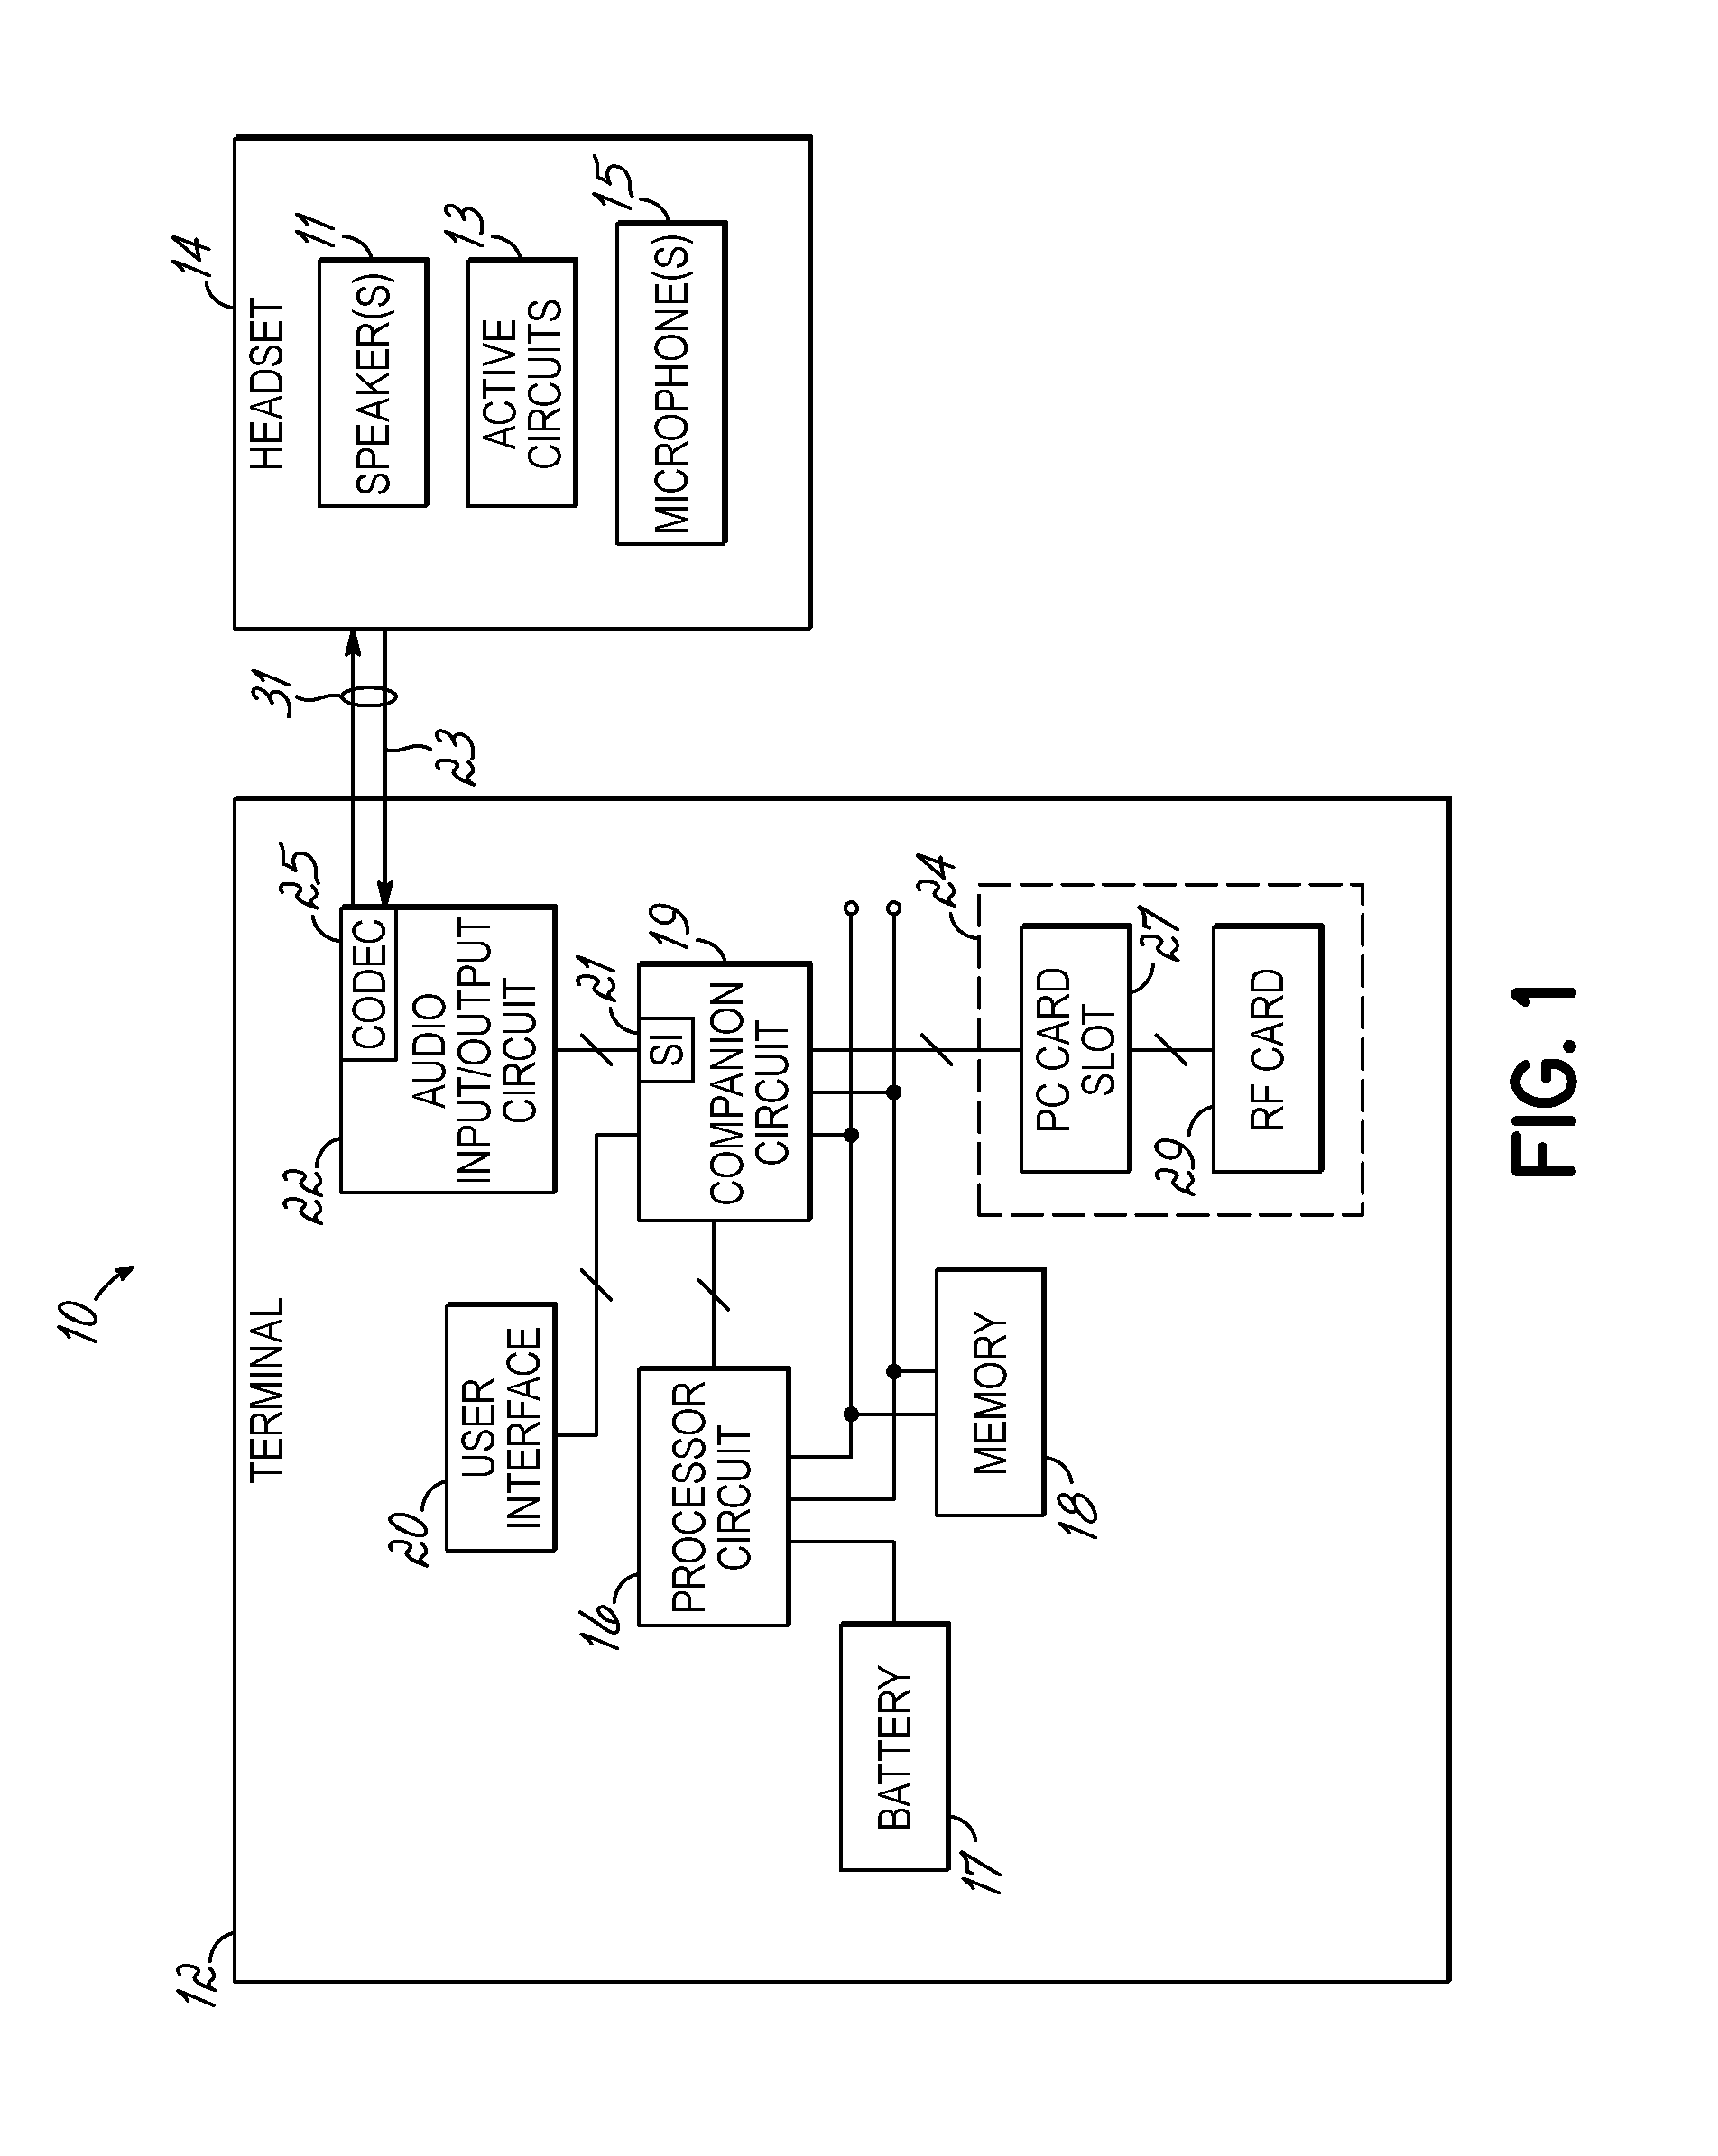 Method and system for power delivery to a headset